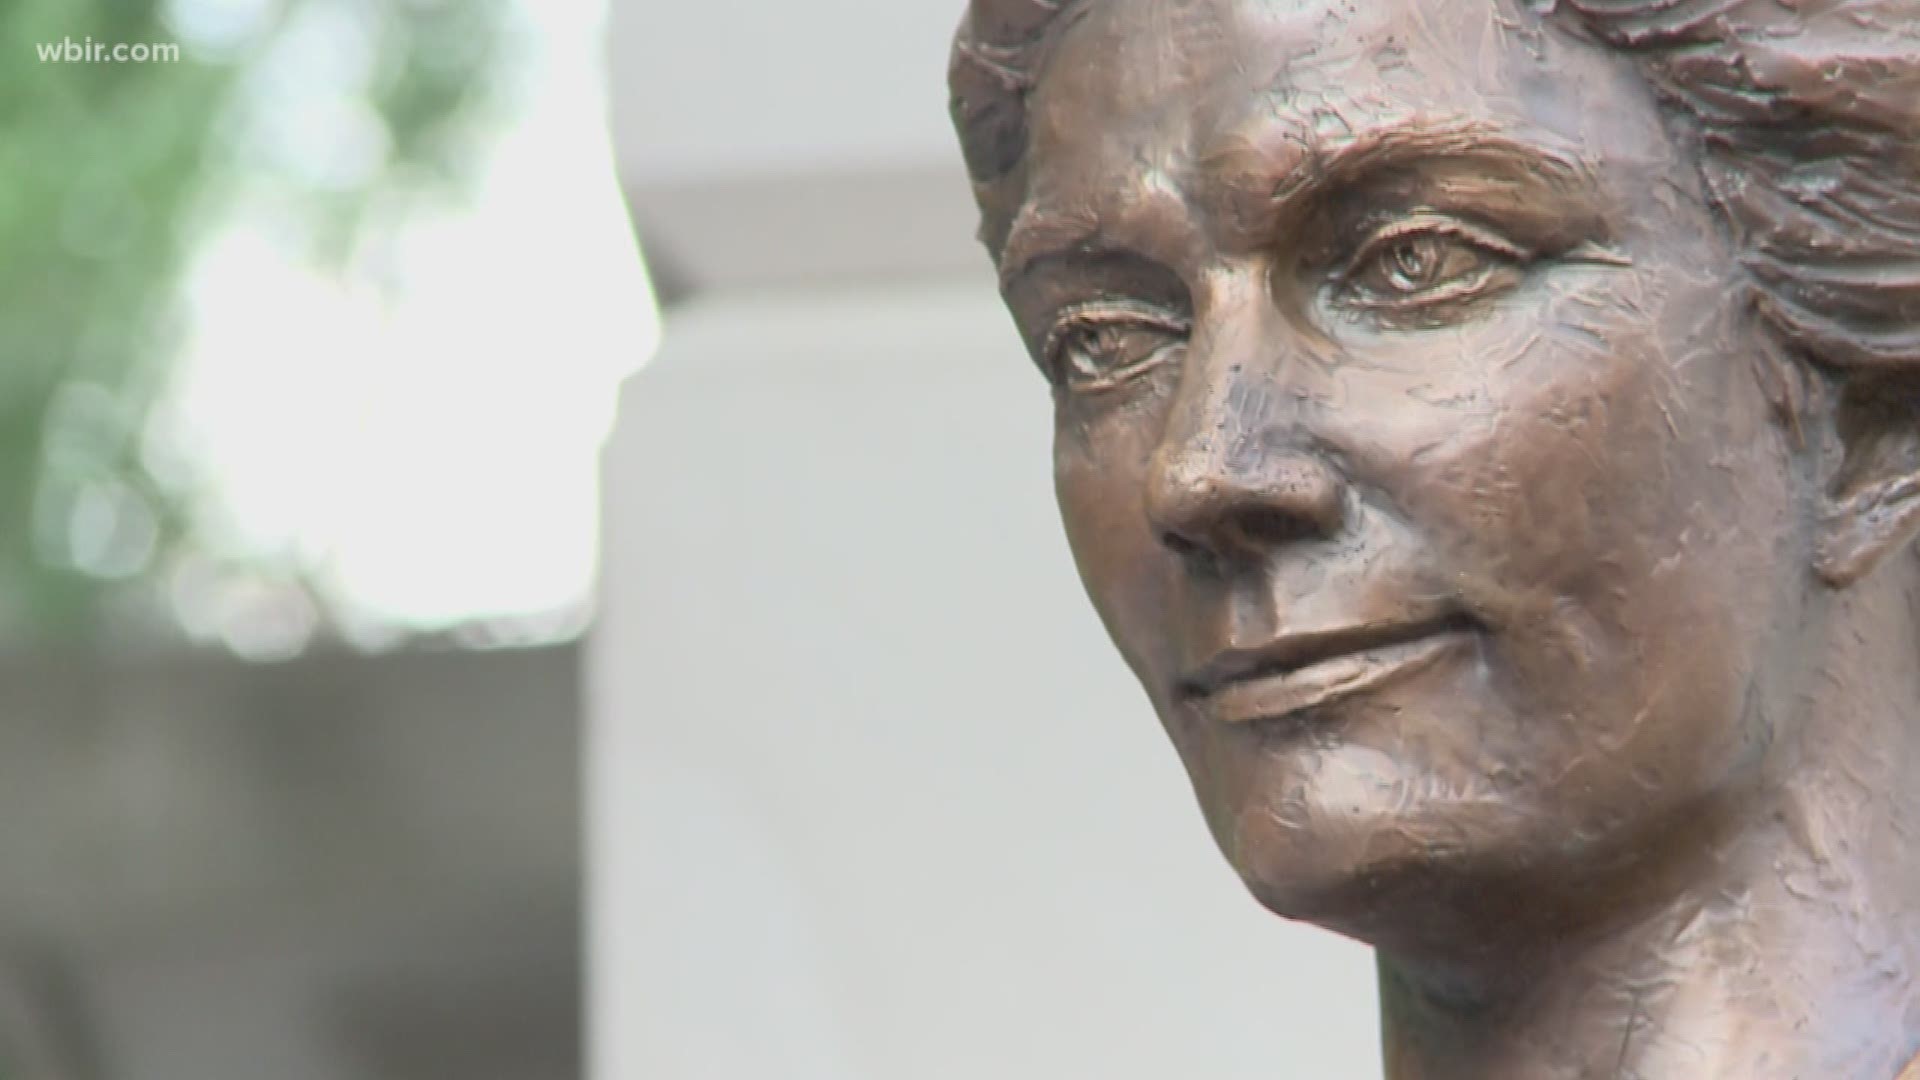 A new monument in downtown Knoxville celebrates the suffrage movement.